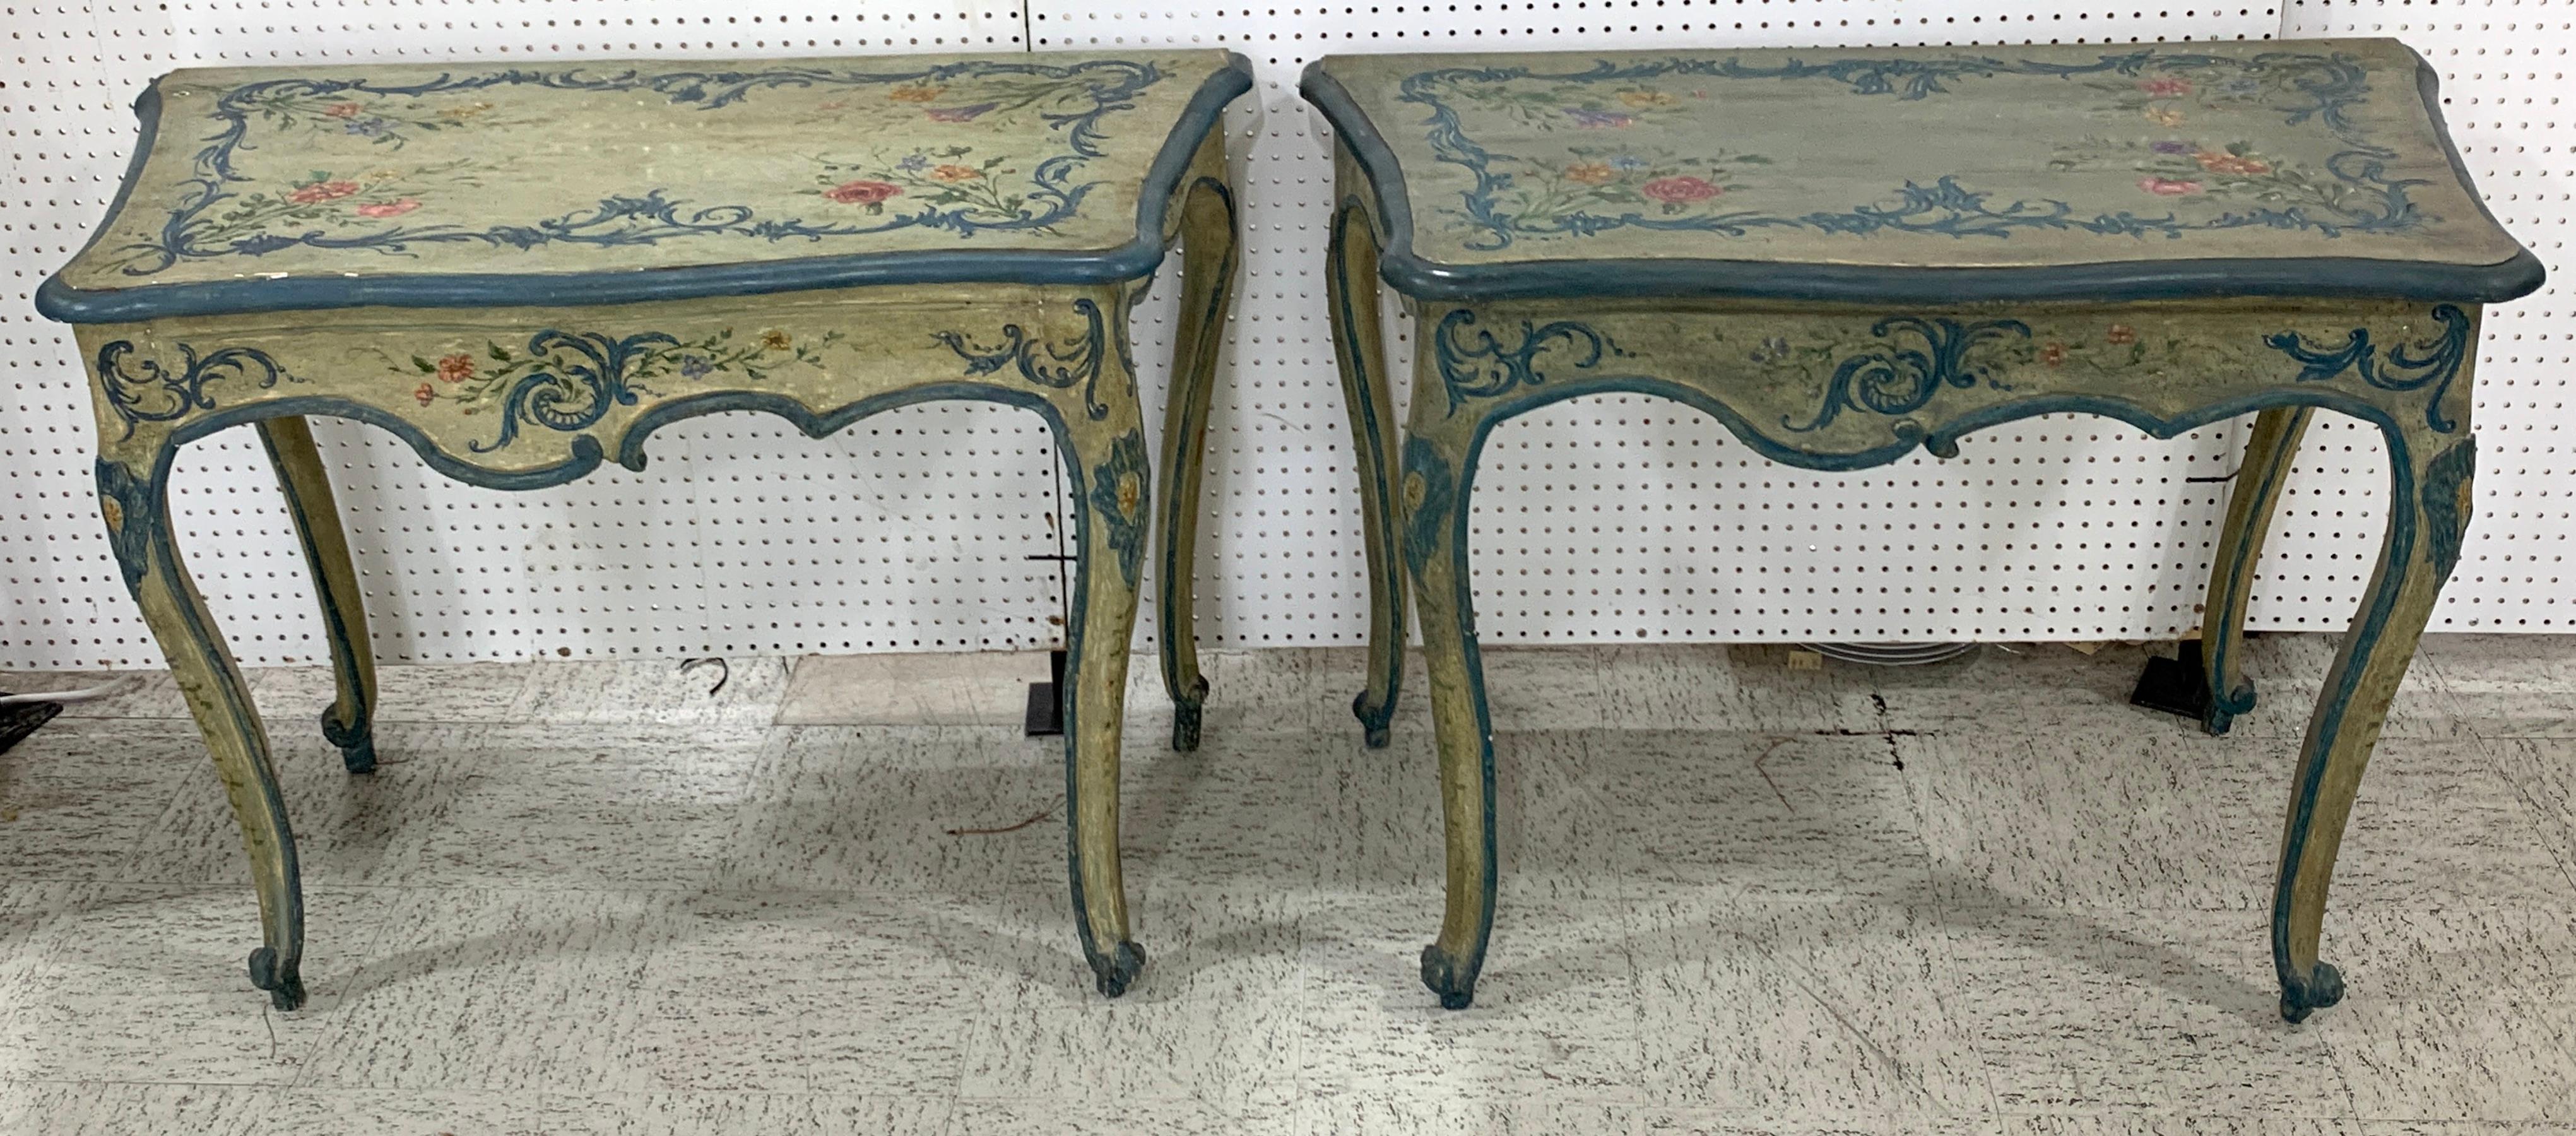 Near pair of 18th-19th century painted Italian console tables each one finely painted with sprays of flowers, raised on slight cabriole legs. One is a shade darker.
Sold individually, please specify lighter or darker
Provenance:
Personal Property